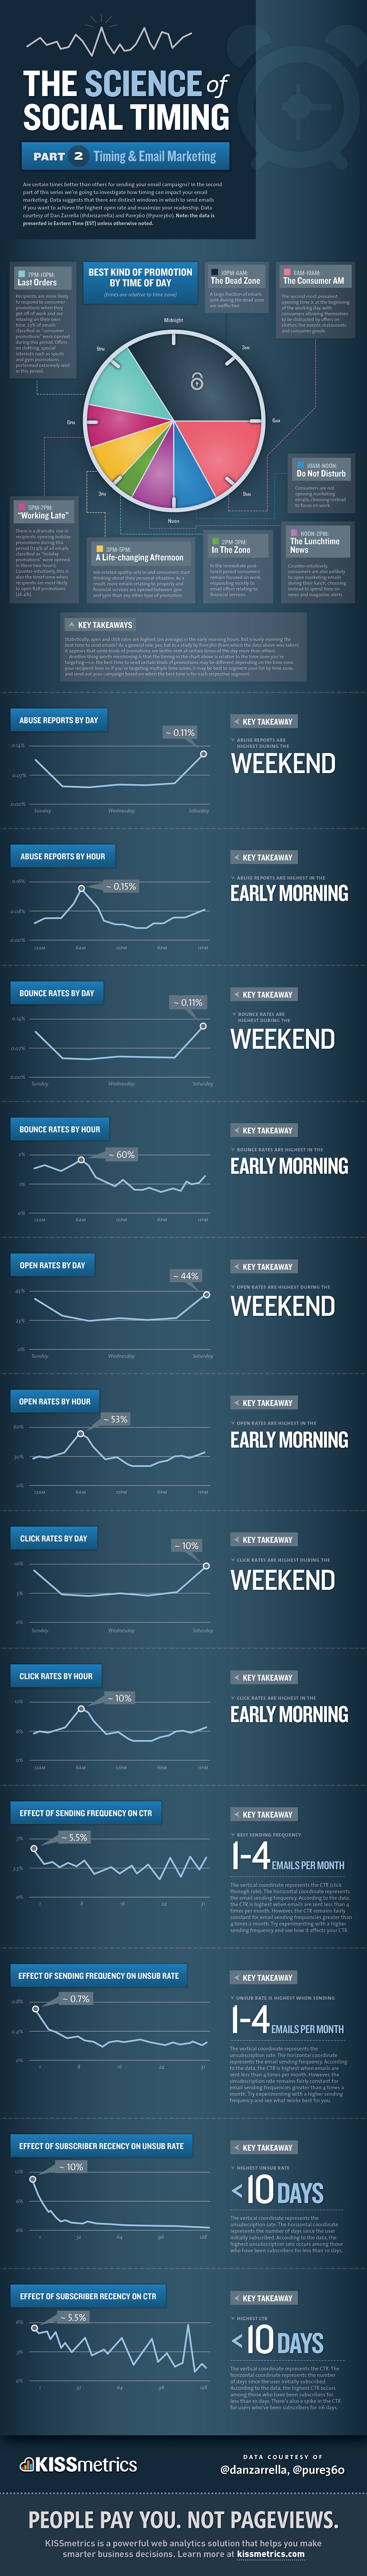 Infographic on How to Get Social Timing Right Part 2: Timing and Email Marketing